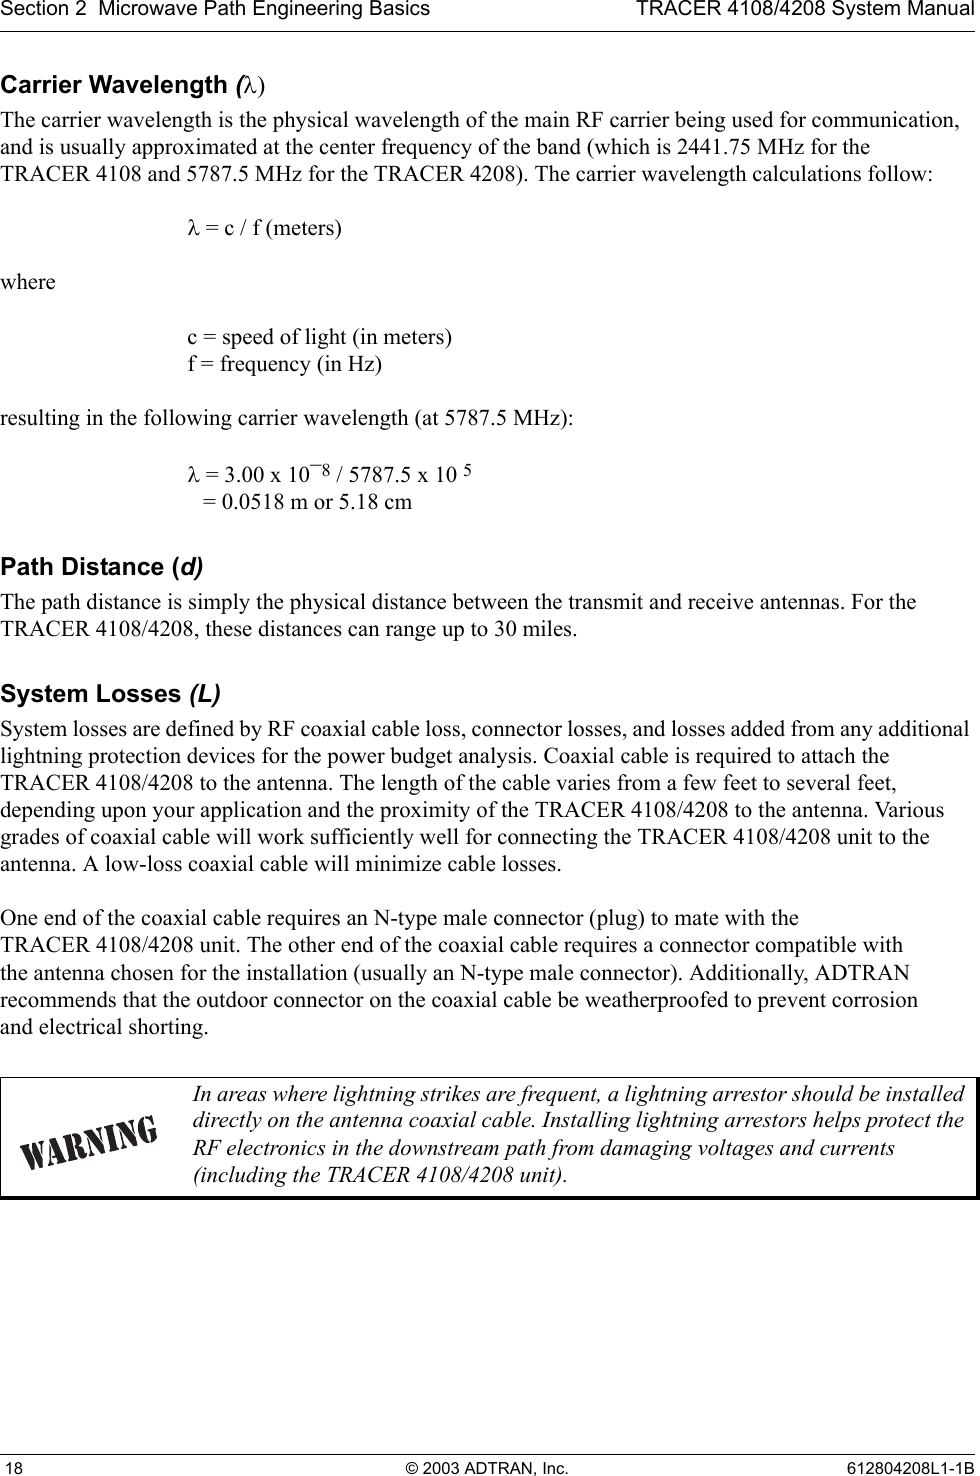 Section 2  Microwave Path Engineering Basics TRACER 4108/4208 System Manual 18 © 2003 ADTRAN, Inc. 612804208L1-1BCarrier Wavelength (λ)The carrier wavelength is the physical wavelength of the main RF carrier being used for communication, and is usually approximated at the center frequency of the band (which is 2441.75 MHz for theTRACER 4108 and 5787.5 MHz for the TRACER 4208). The carrier wavelength calculations follow:λ = c / f (meters)where c = speed of light (in meters)f = frequency (in Hz)resulting in the following carrier wavelength (at 5787.5 MHz):λ = 3.00 x 10¯8 / 5787.5 x 10 5 = 0.0518 m or 5.18 cmPath Distance (d)The path distance is simply the physical distance between the transmit and receive antennas. For the TRACER 4108/4208, these distances can range up to 30 miles. System Losses (L)System losses are defined by RF coaxial cable loss, connector losses, and losses added from any additional lightning protection devices for the power budget analysis. Coaxial cable is required to attach the TRACER 4108/4208 to the antenna. The length of the cable varies from a few feet to several feet, depending upon your application and the proximity of the TRACER 4108/4208 to the antenna. Various grades of coaxial cable will work sufficiently well for connecting the TRACER 4108/4208 unit to the antenna. A low-loss coaxial cable will minimize cable losses.One end of the coaxial cable requires an N-type male connector (plug) to mate with theTRACER 4108/4208 unit. The other end of the coaxial cable requires a connector compatible withthe antenna chosen for the installation (usually an N-type male connector). Additionally, ADTRAN recommends that the outdoor connector on the coaxial cable be weatherproofed to prevent corrosionand electrical shorting.In areas where lightning strikes are frequent, a lightning arrestor should be installed directly on the antenna coaxial cable. Installing lightning arrestors helps protect the RF electronics in the downstream path from damaging voltages and currents (including the TRACER 4108/4208 unit).